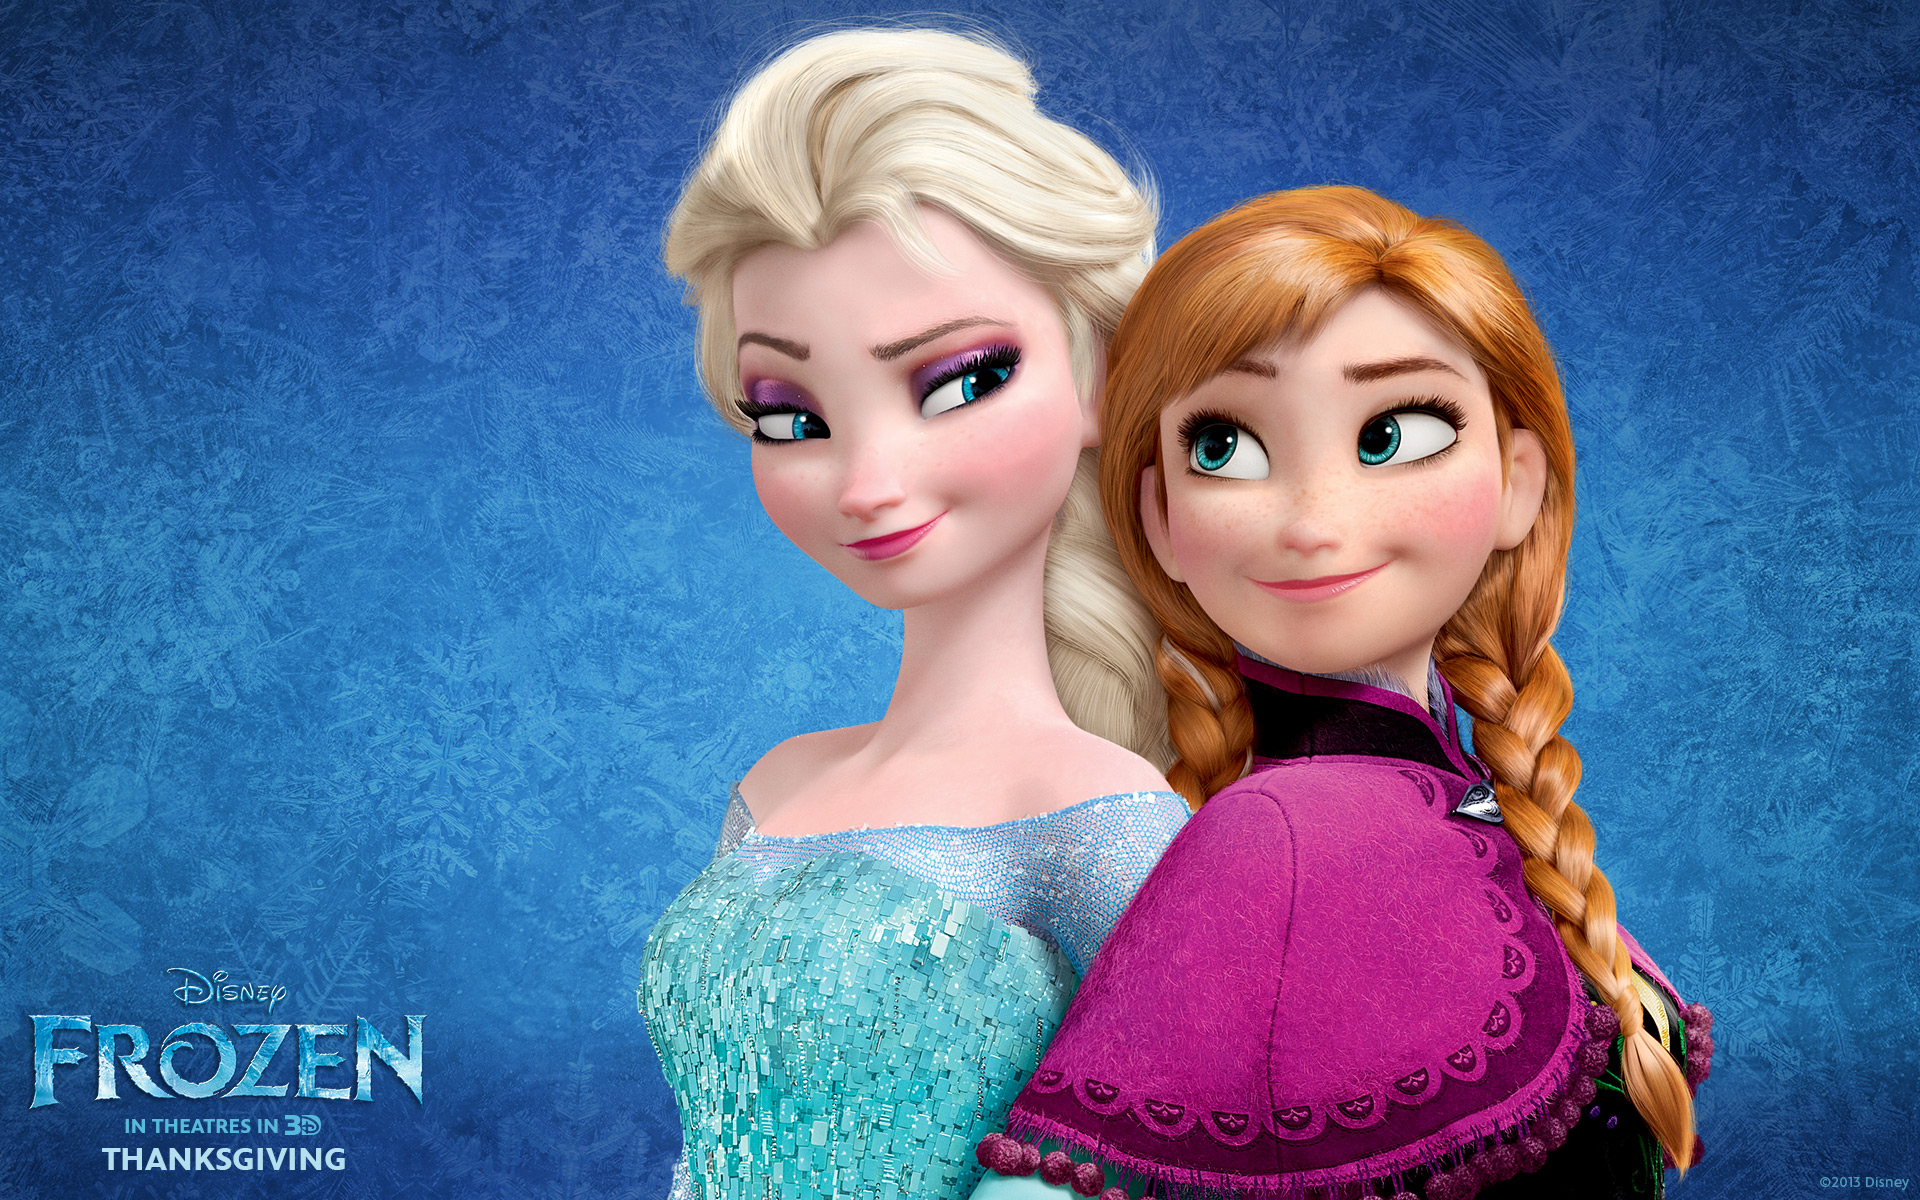  Disneys Frozen wallpaper   Click picture for high resolution HD 1920x1200